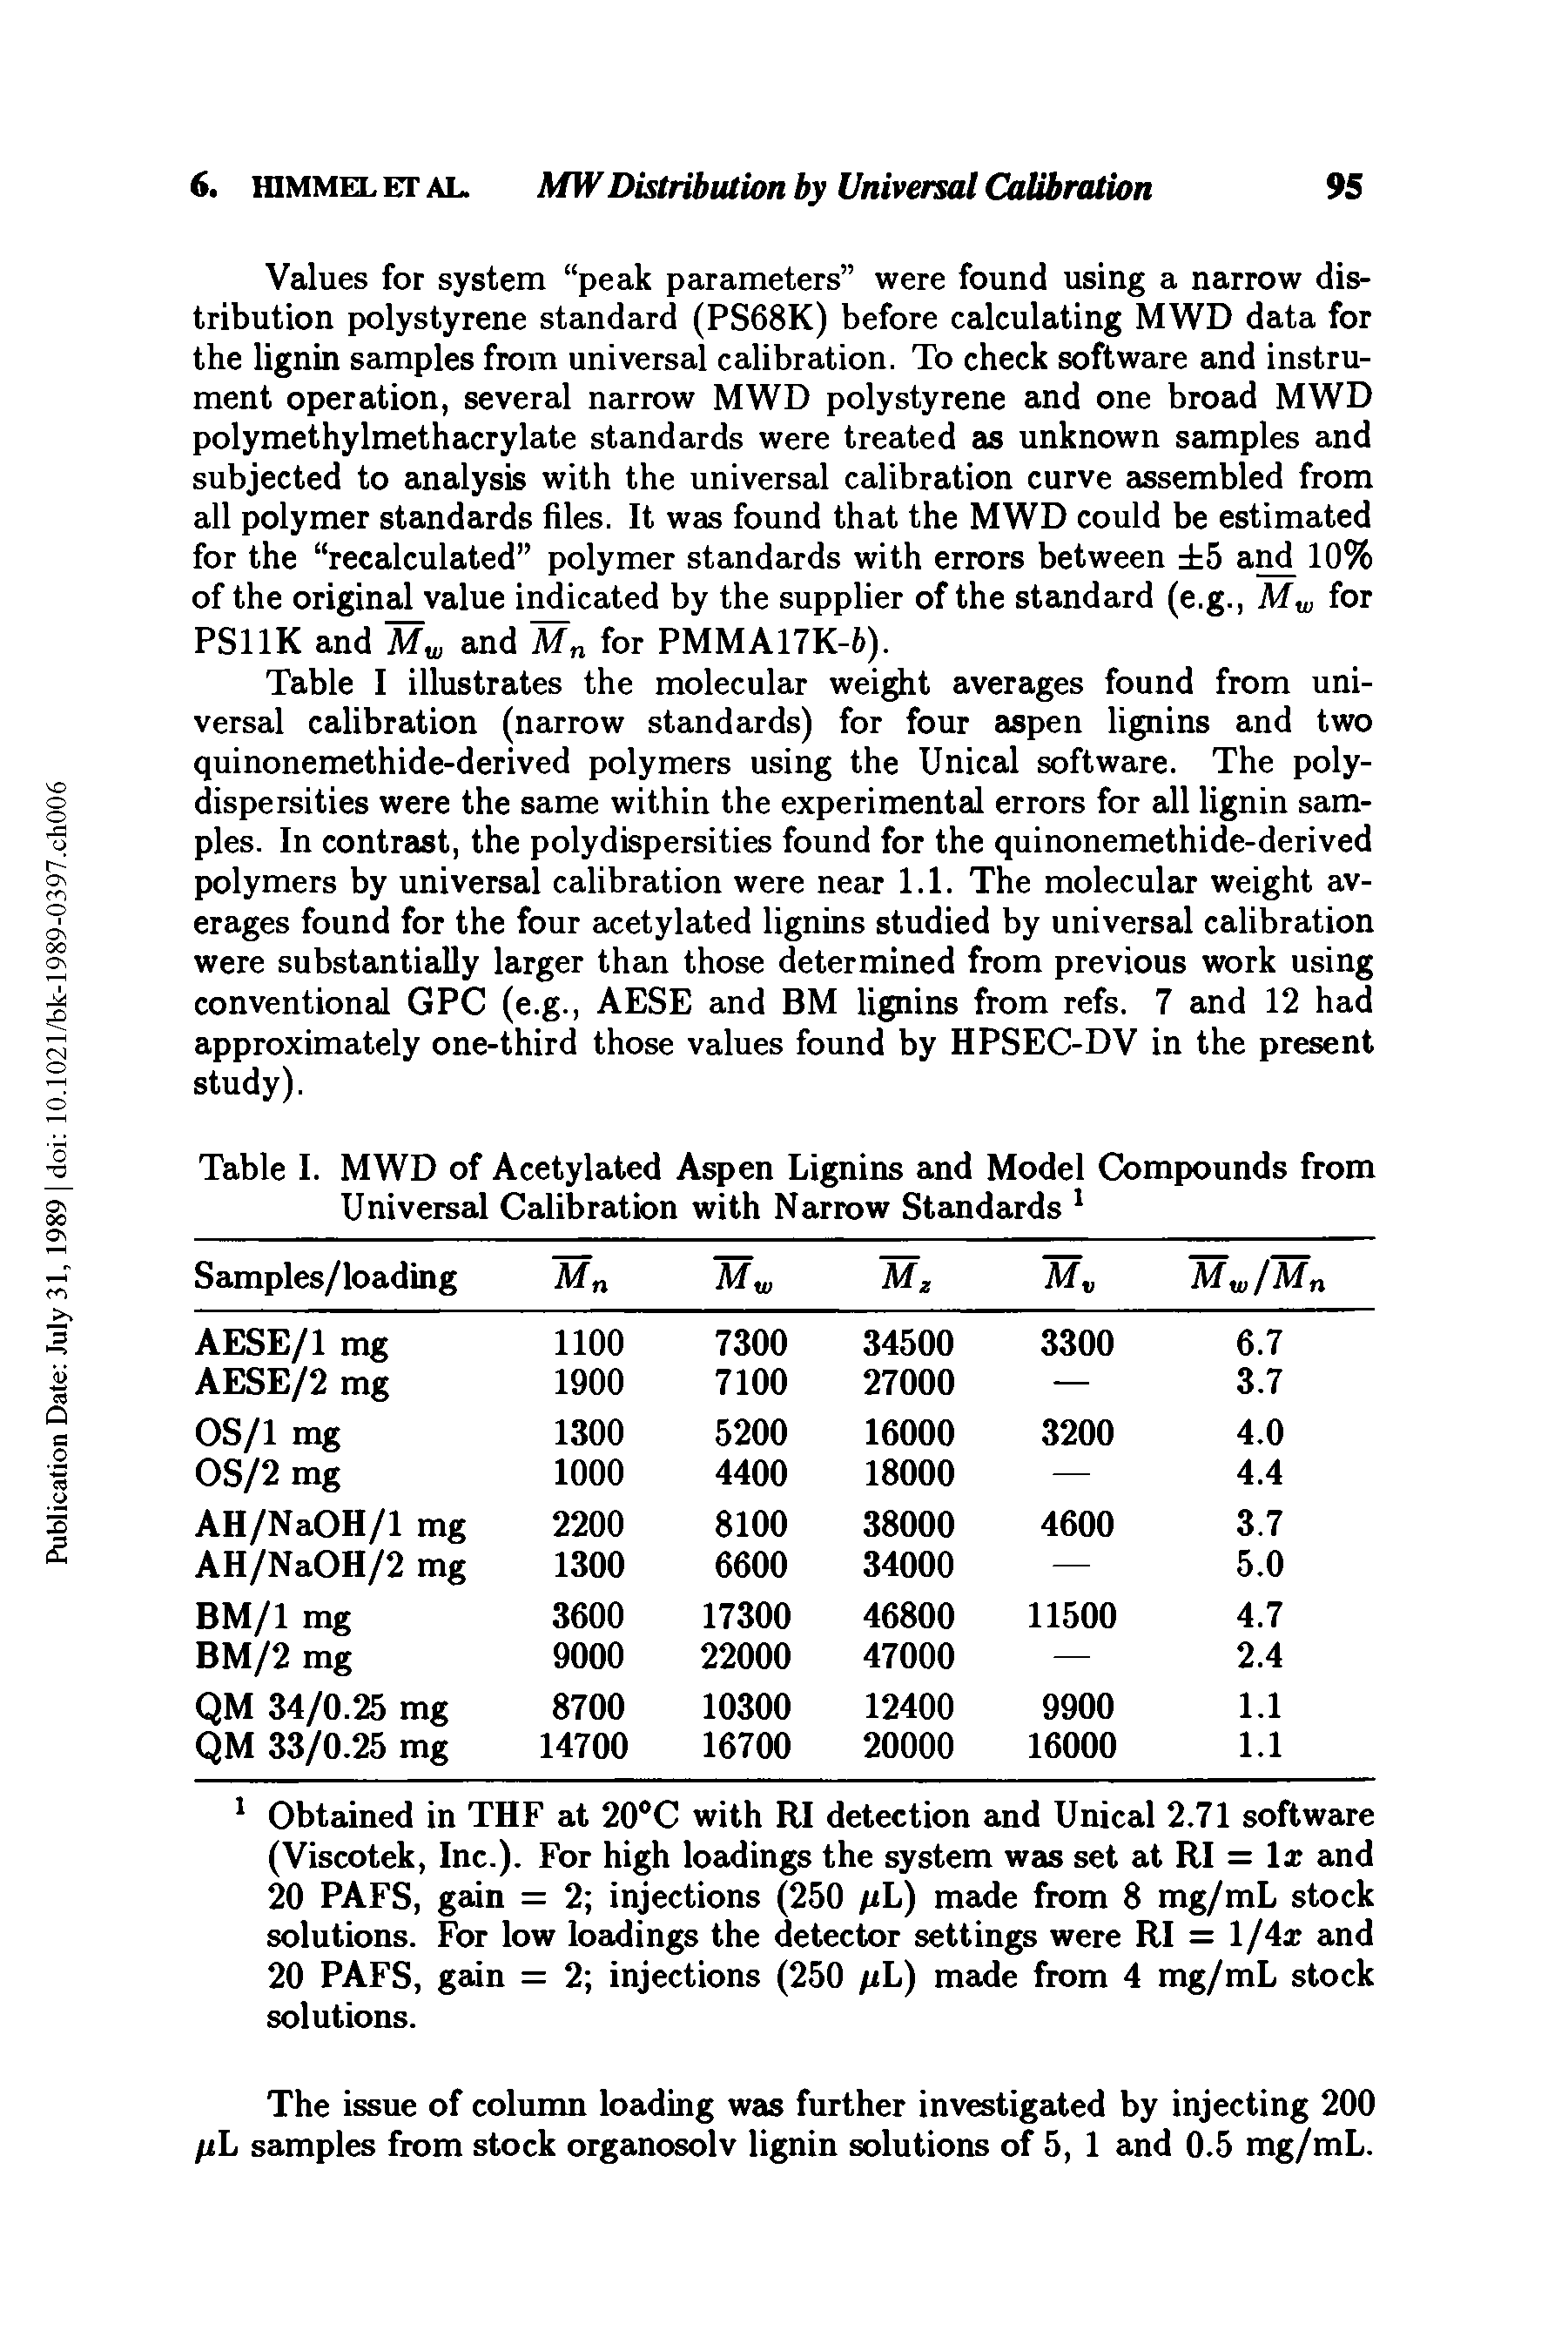 Table I illustrates the molecular weight averages found from universal calibration (narrow standards) for four aspen lignins and two quinonemethide-derived polymers using the Unical software. The poly-dispersities were the same within the experimental errors for all lignin samples. In contrast, the polydispersities found for the quinonemethide-derived polymers by universal calibration were near 1.1. The molecular weight averages found for the four acetylated lignins studied by universal calibration were substantially larger than those determined from previous work using conventional GPC (e.g., AESE and BM lignins from refs. 7 and 12 had approximately one-third those values found by HPSEC-DV in the present study).